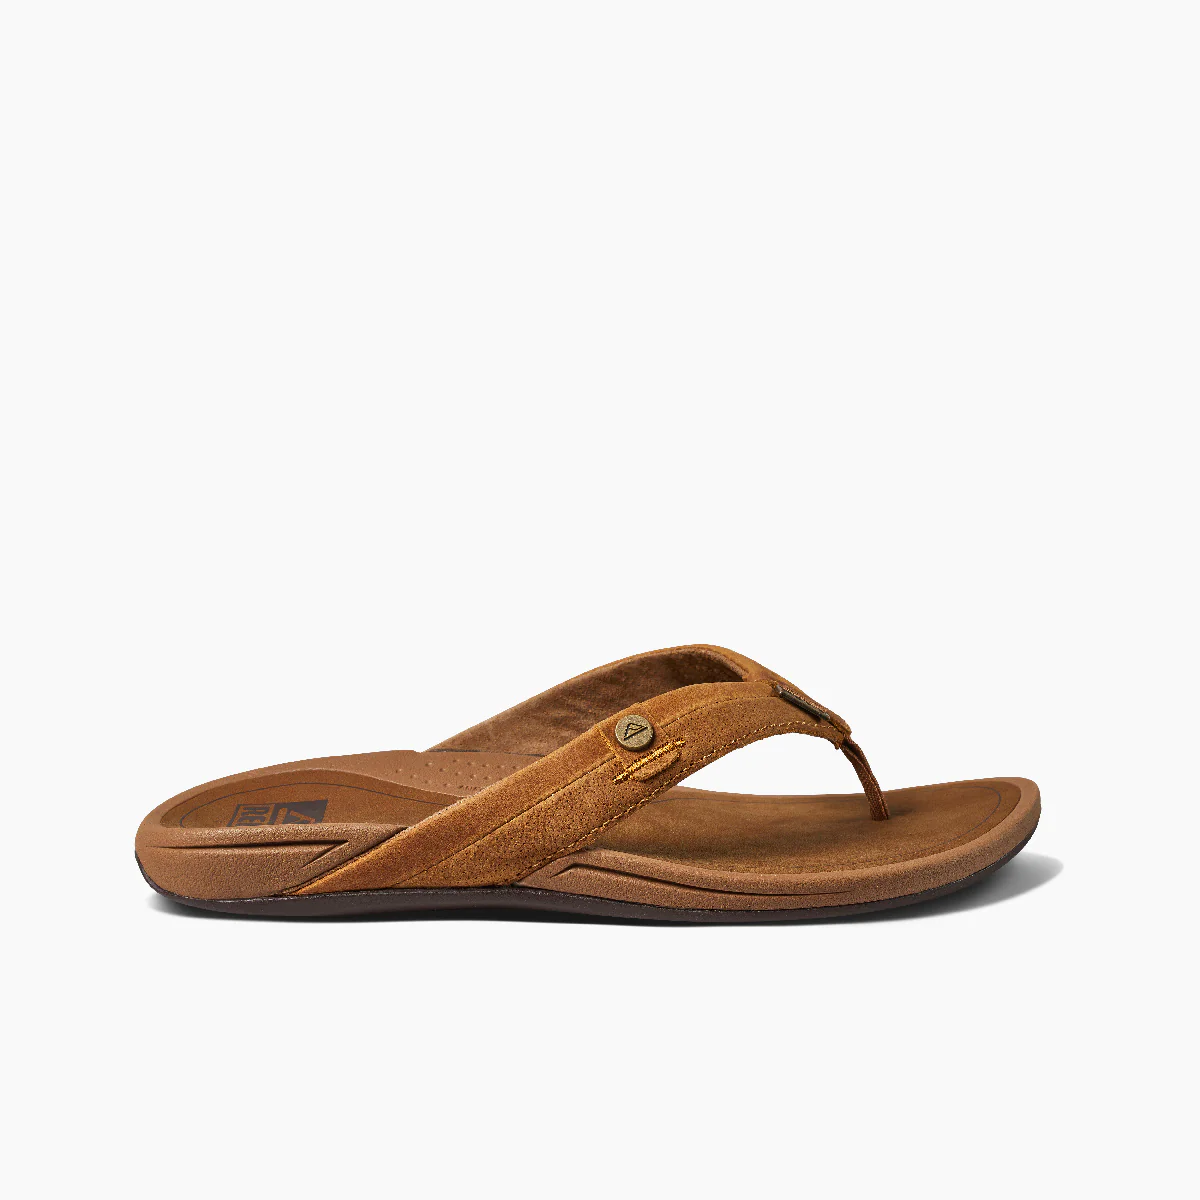 Women's Reef Pacific Sandals in Caramel side view